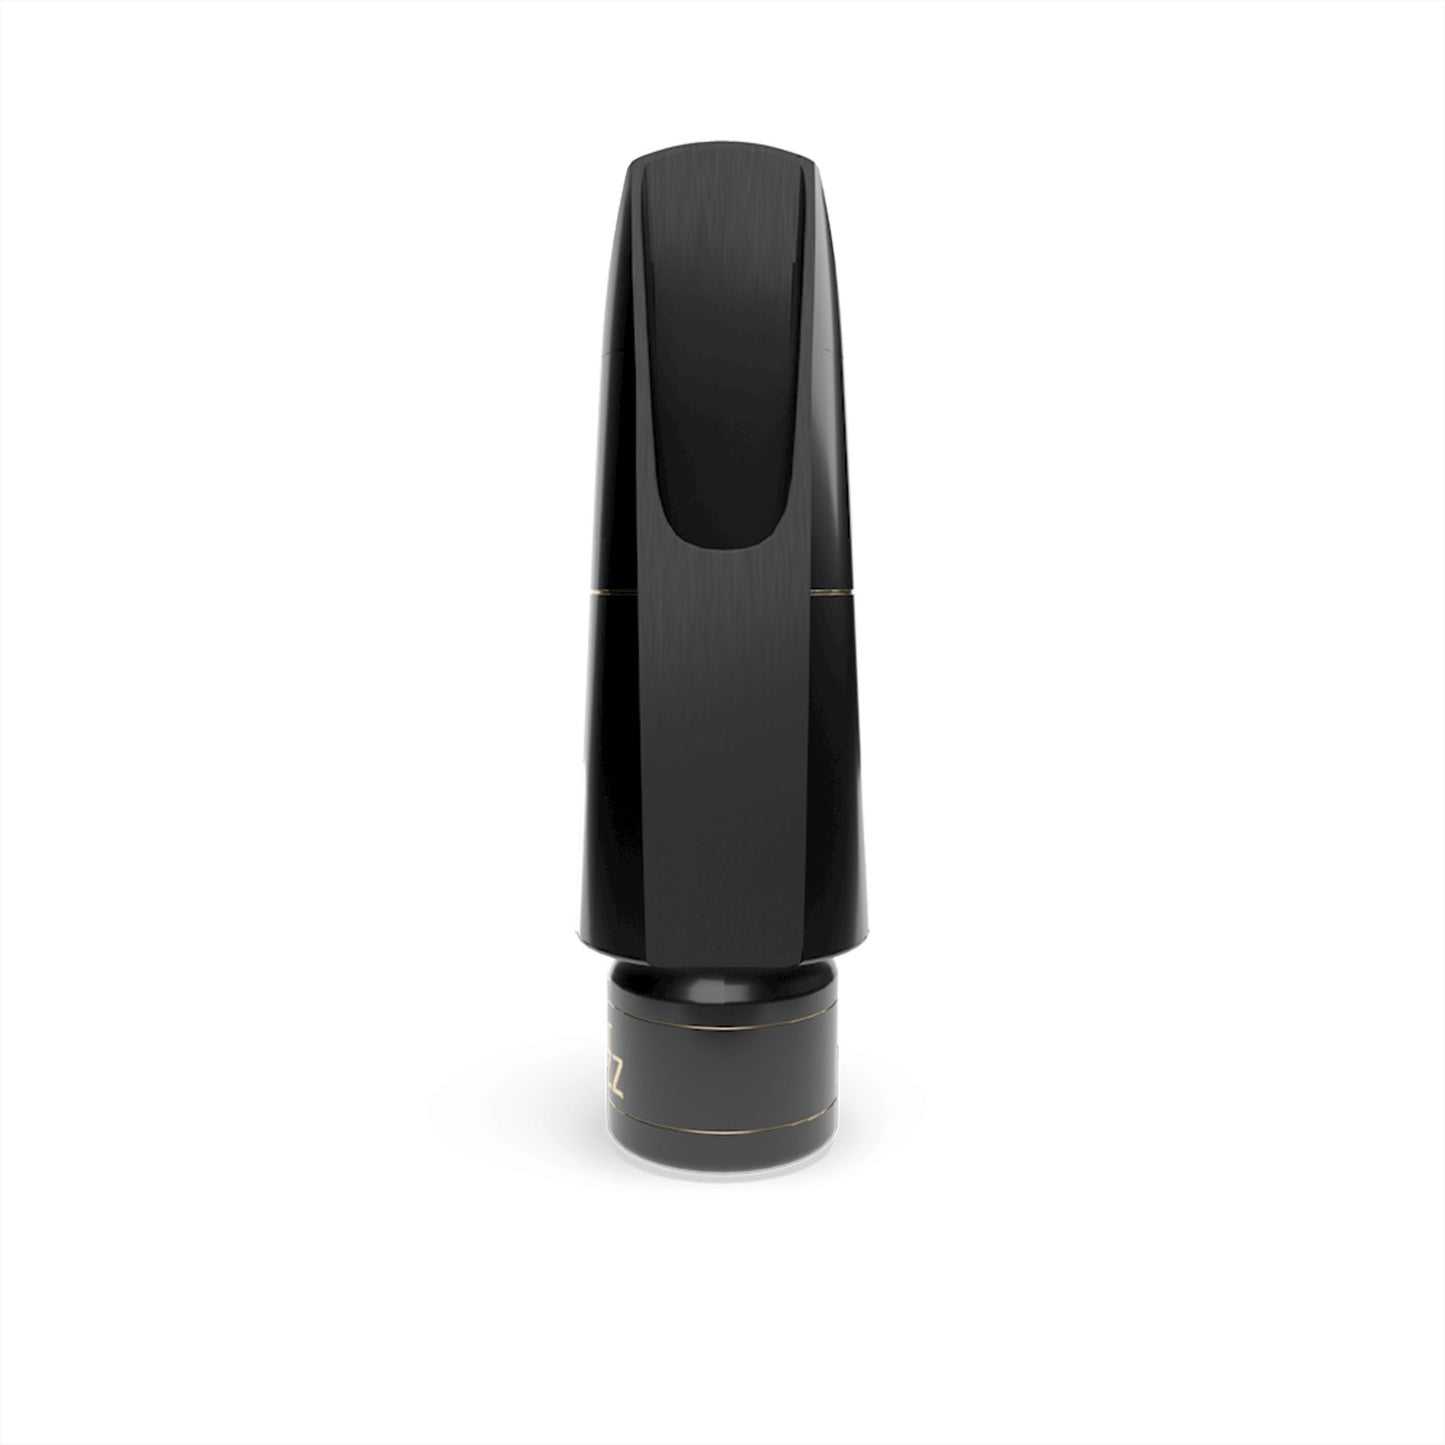 Rear view photo of D'addario Select Jazz Tenor Sax mouthpiece on a white background